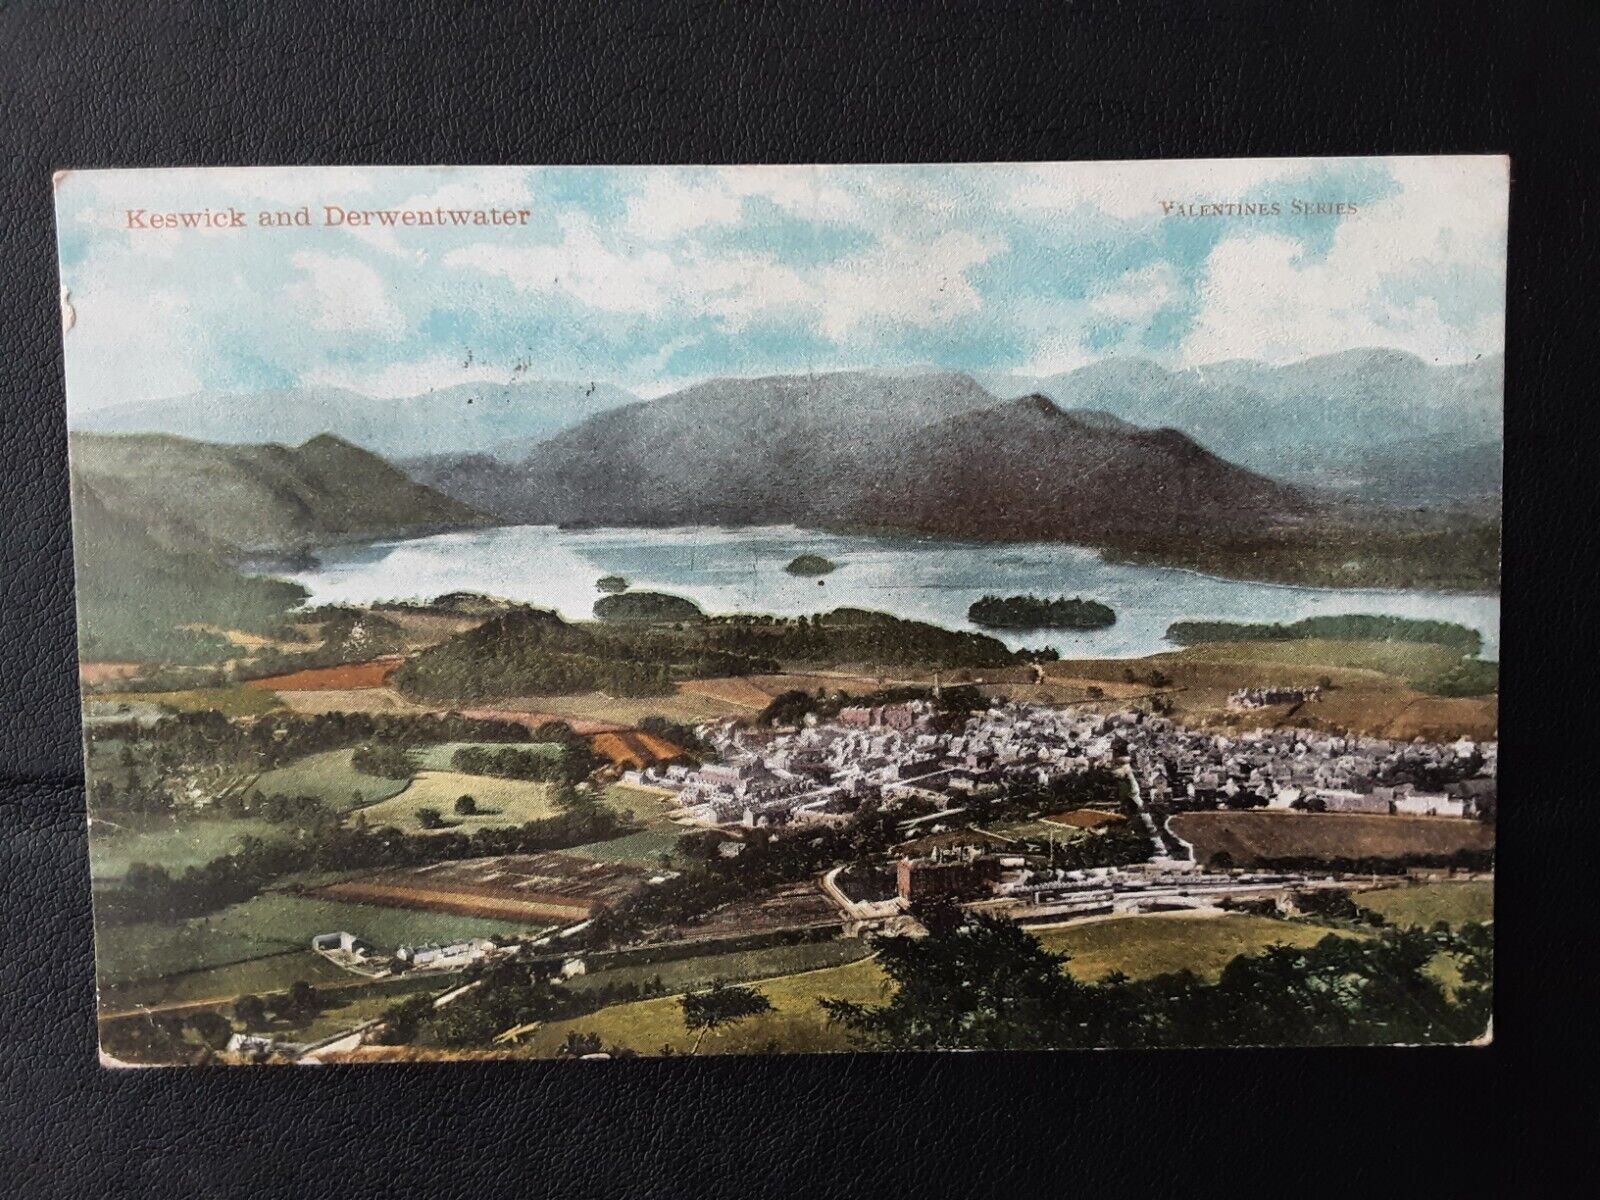 House Clearance - Old Valentines service of View of Keswick and Derwentwater, Cumbria posted 1905